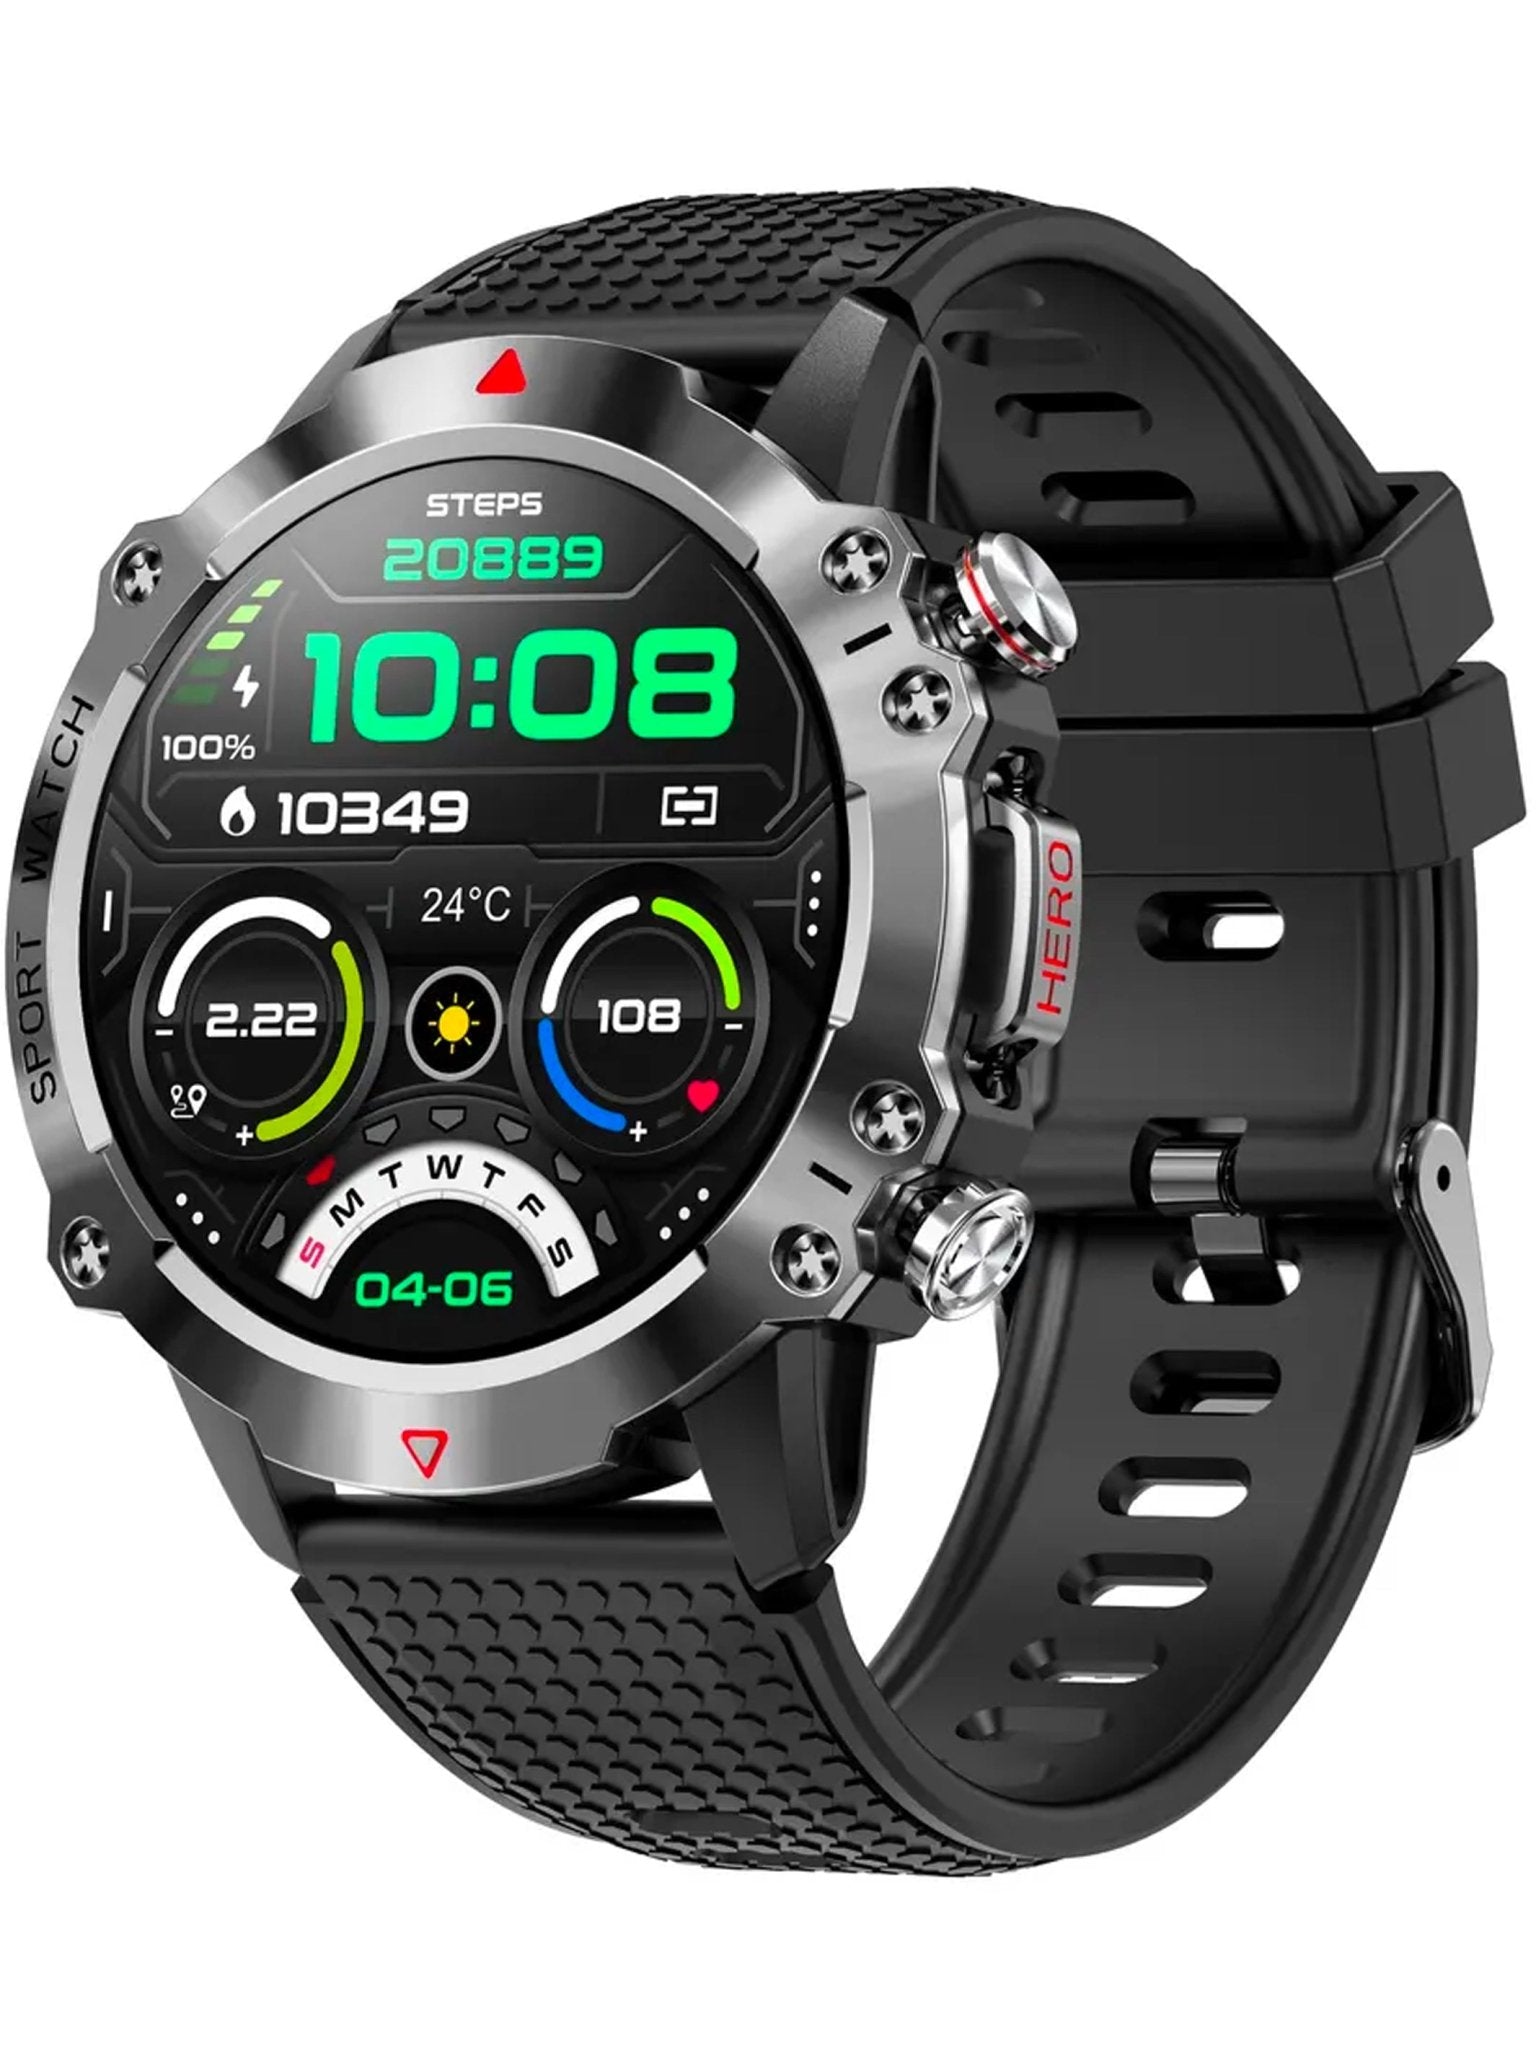 4elementsclothingTelsaTELSA UK - Waterproof Smart Watch T410 Sports & fitness digital Watch military style mens with Touch Screen display, Fitness Watch, Smart Watch for men IOS & AndroidWatch5060976970351